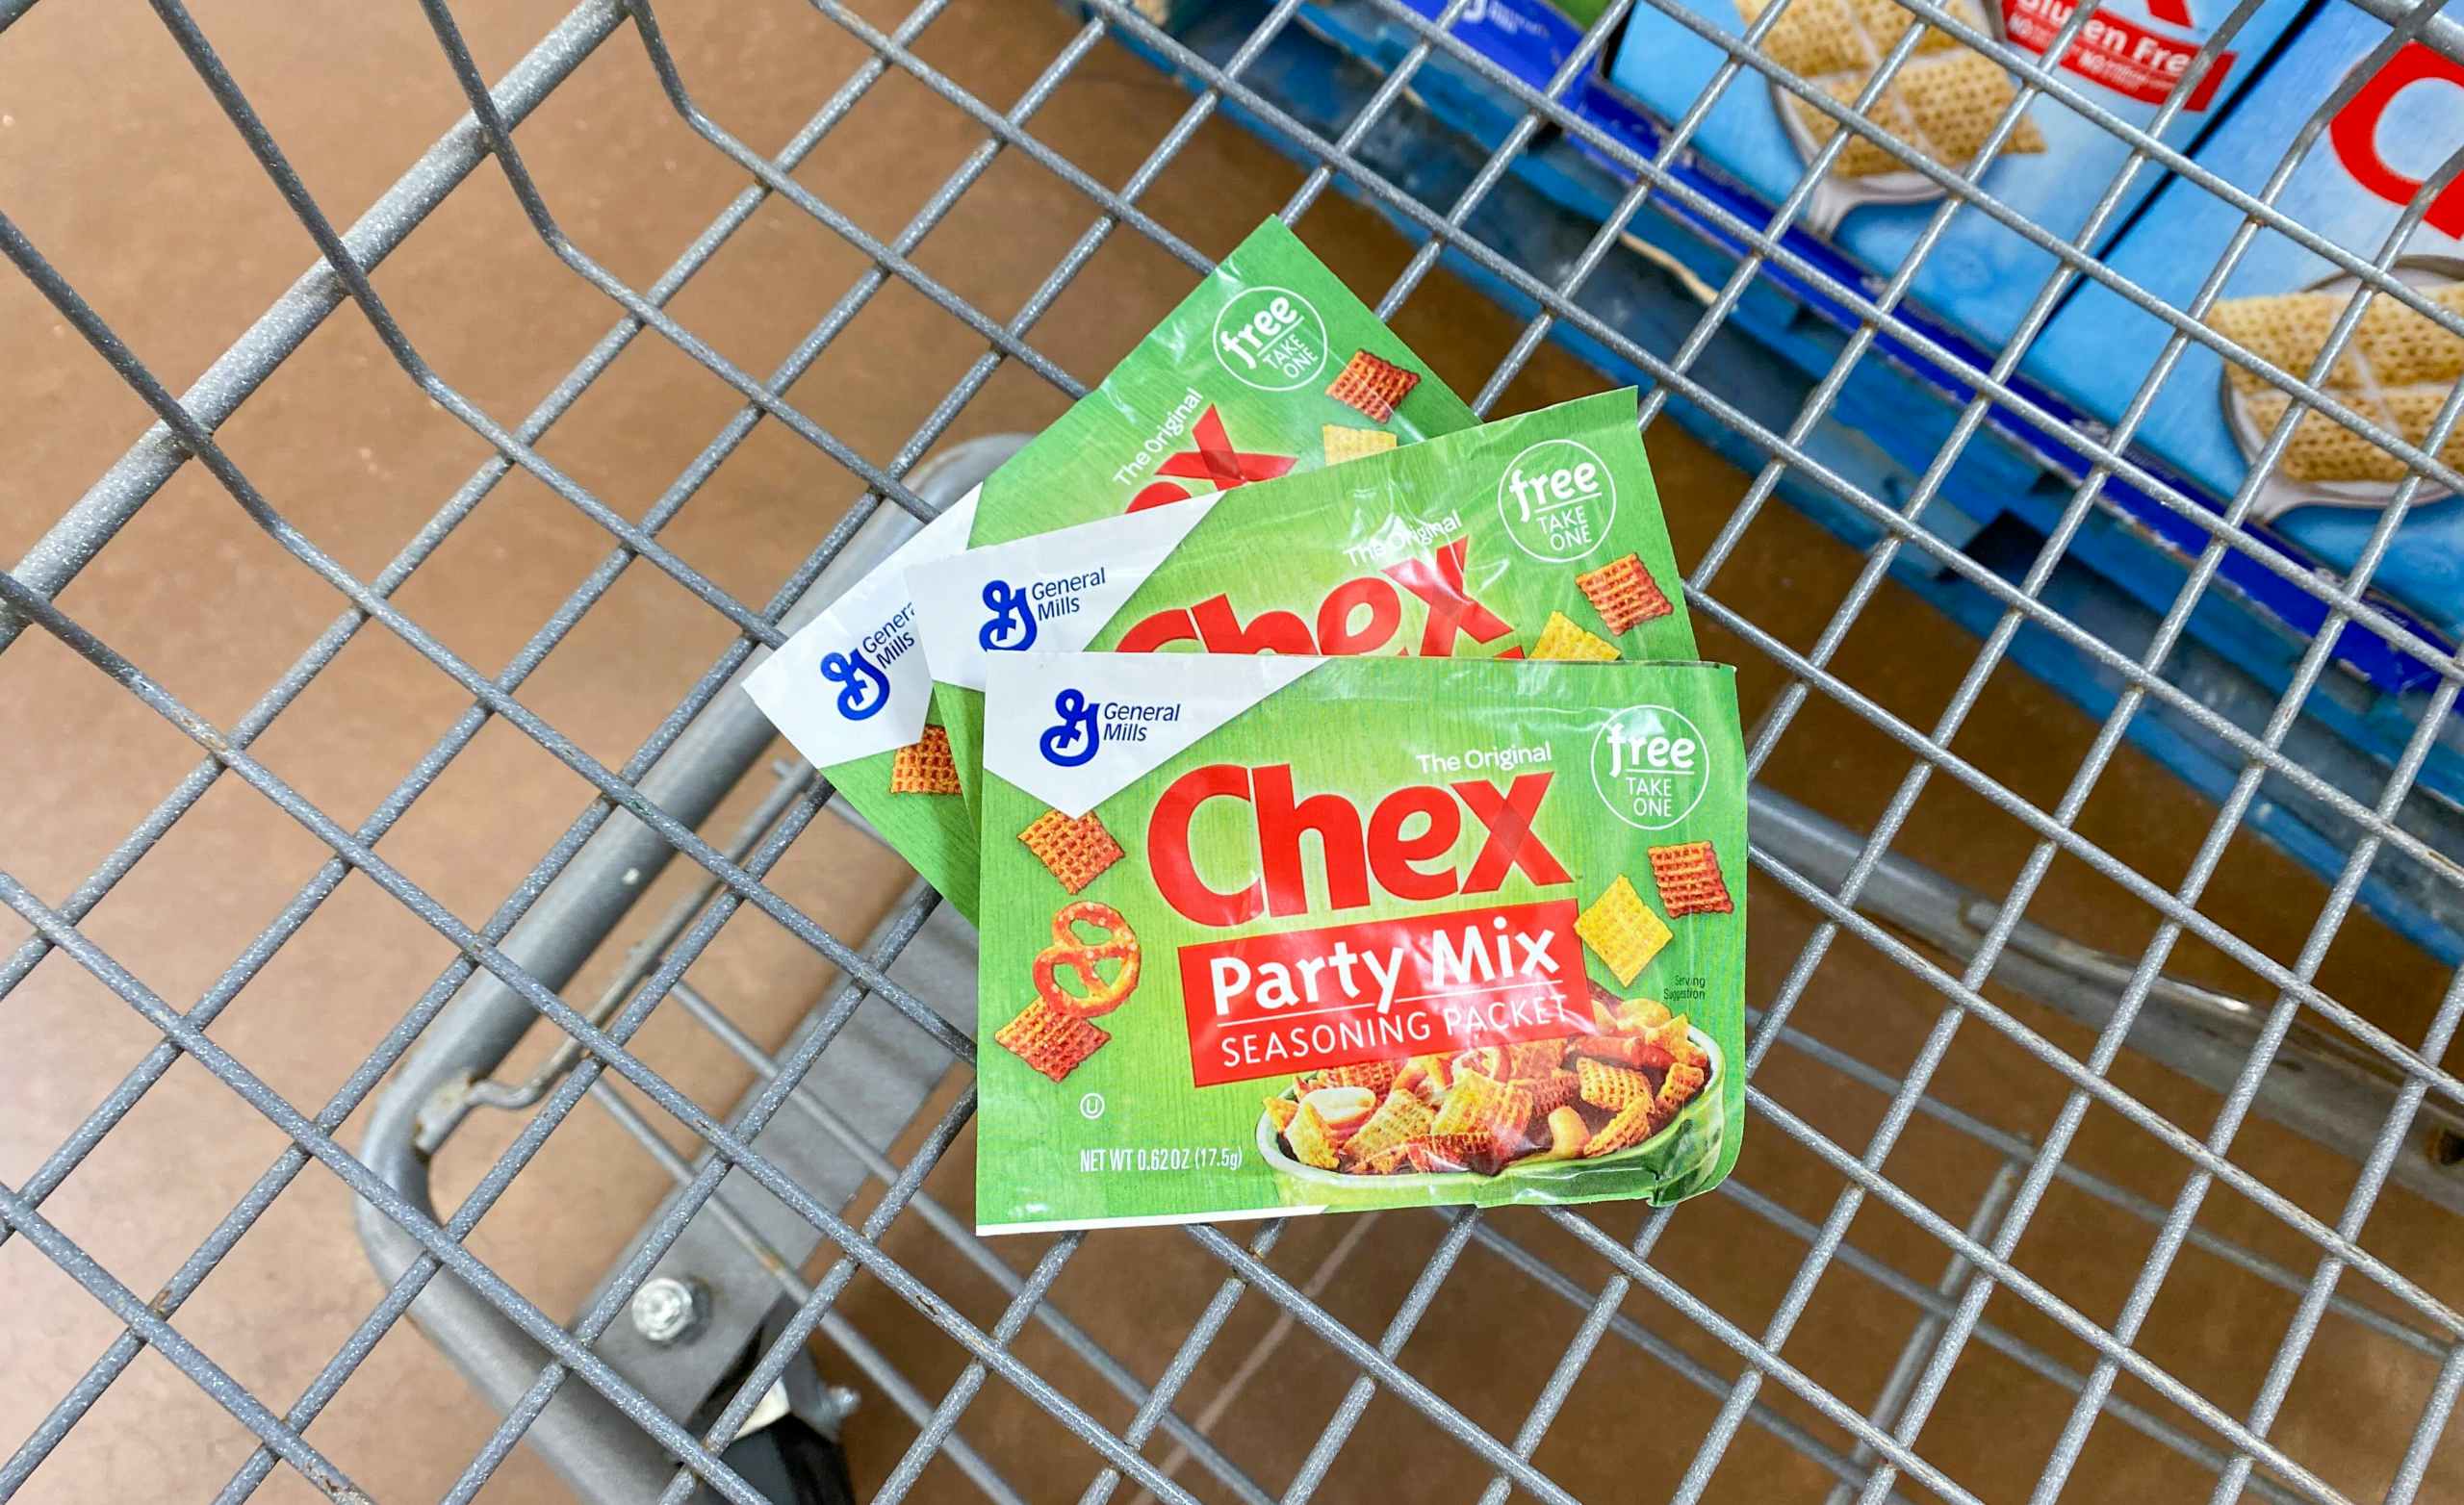 Chex Party Mix Seasoning Packet in Walmart shopping cart